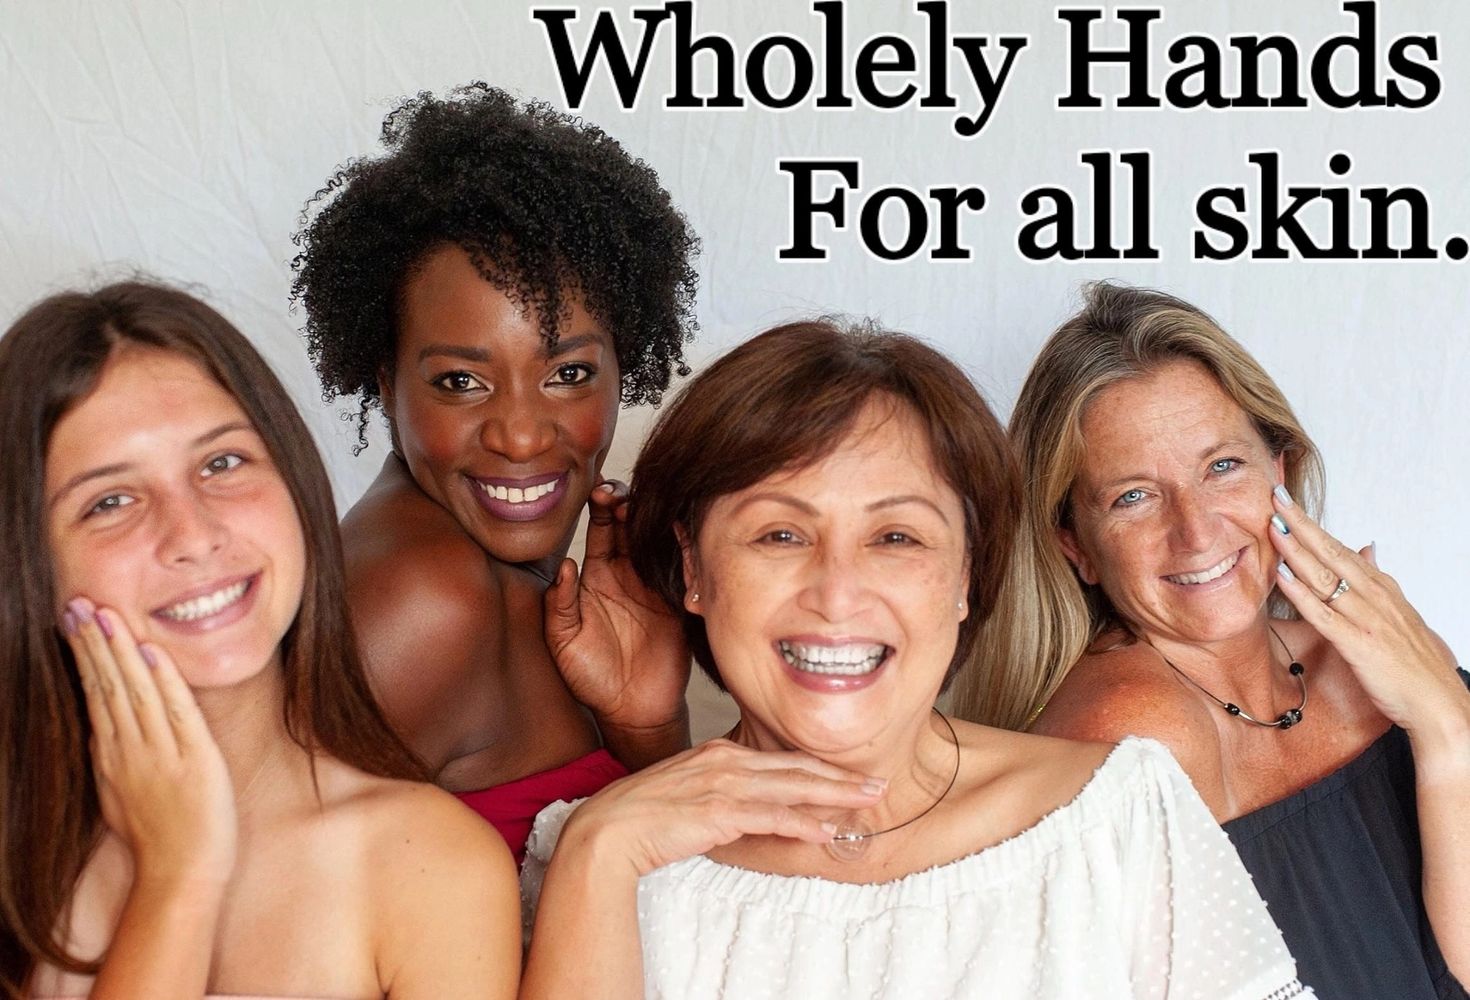 Wholely Hands Massage diverse group of women